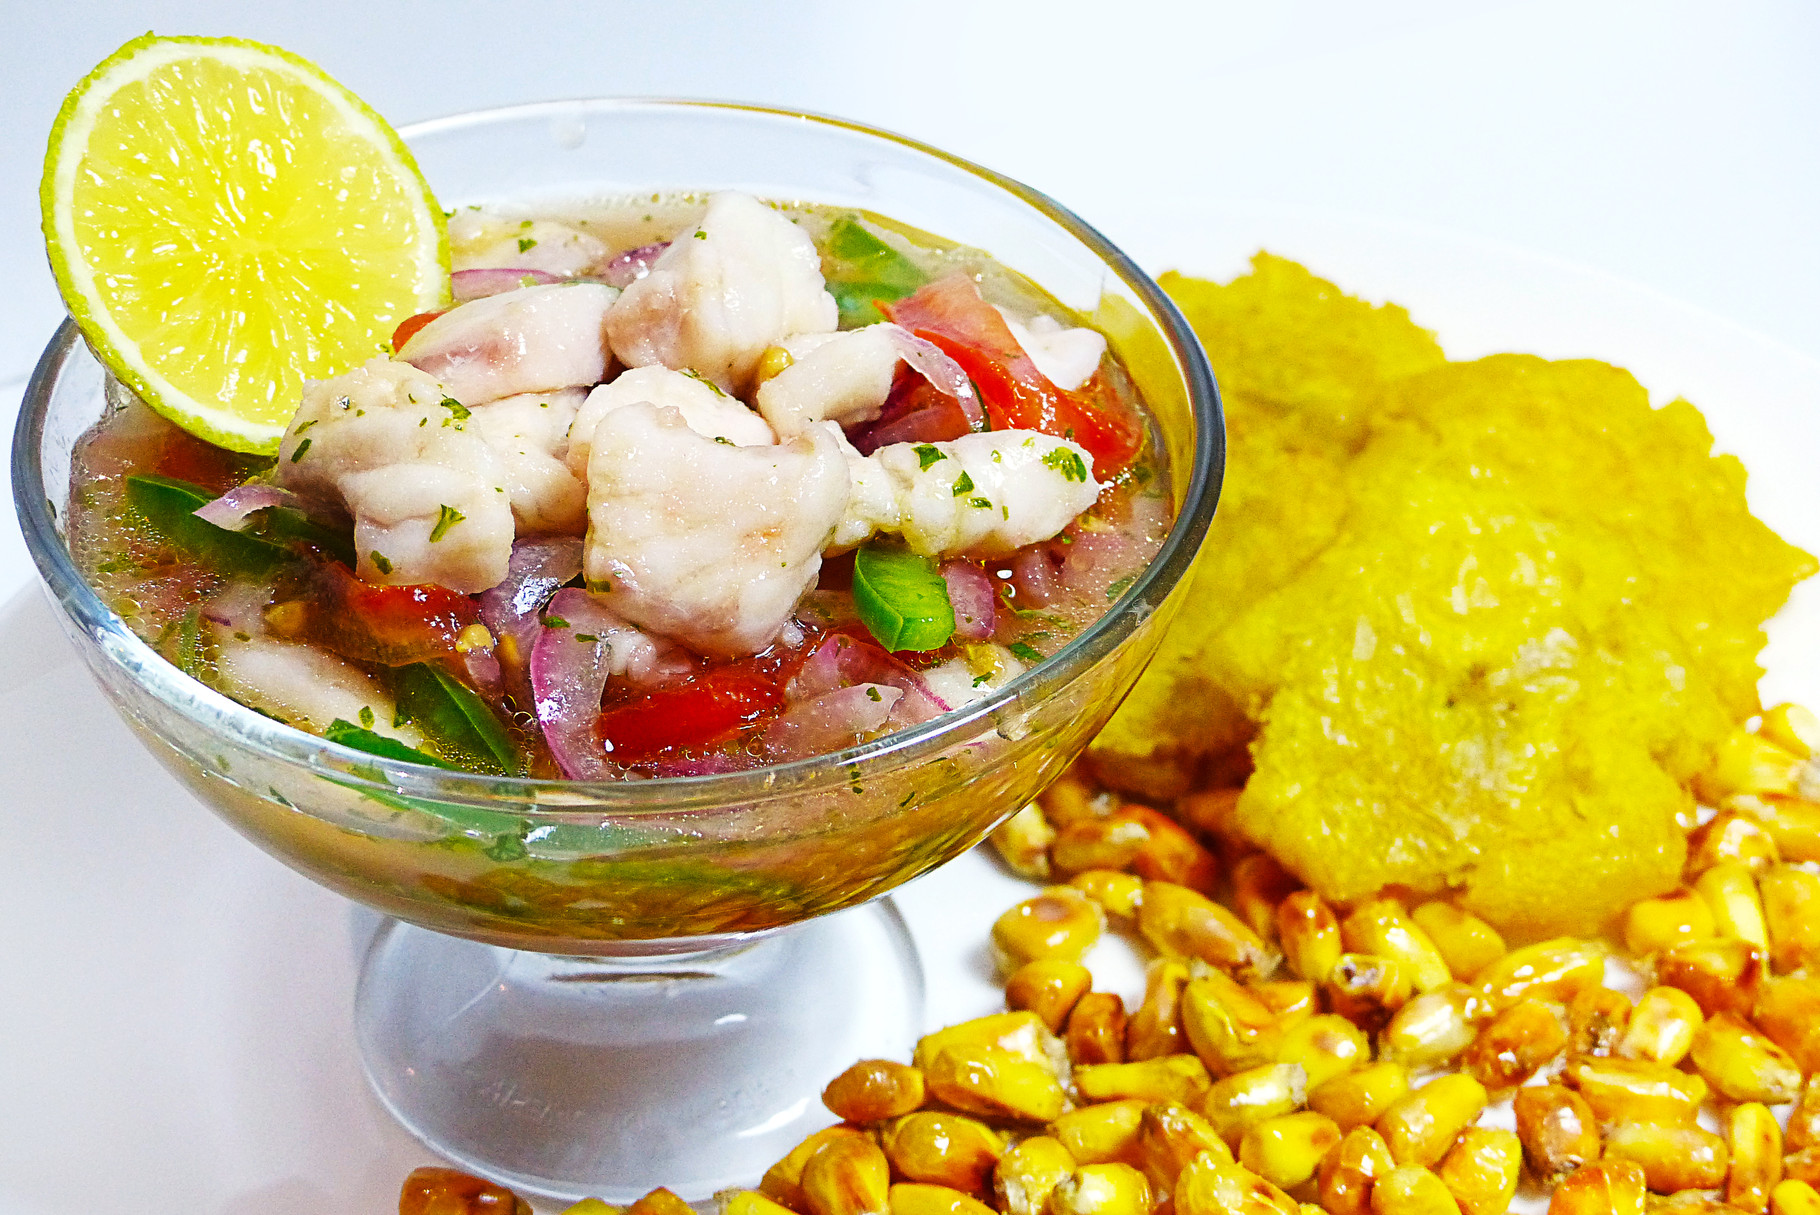 these Costa Rican foods are delicious